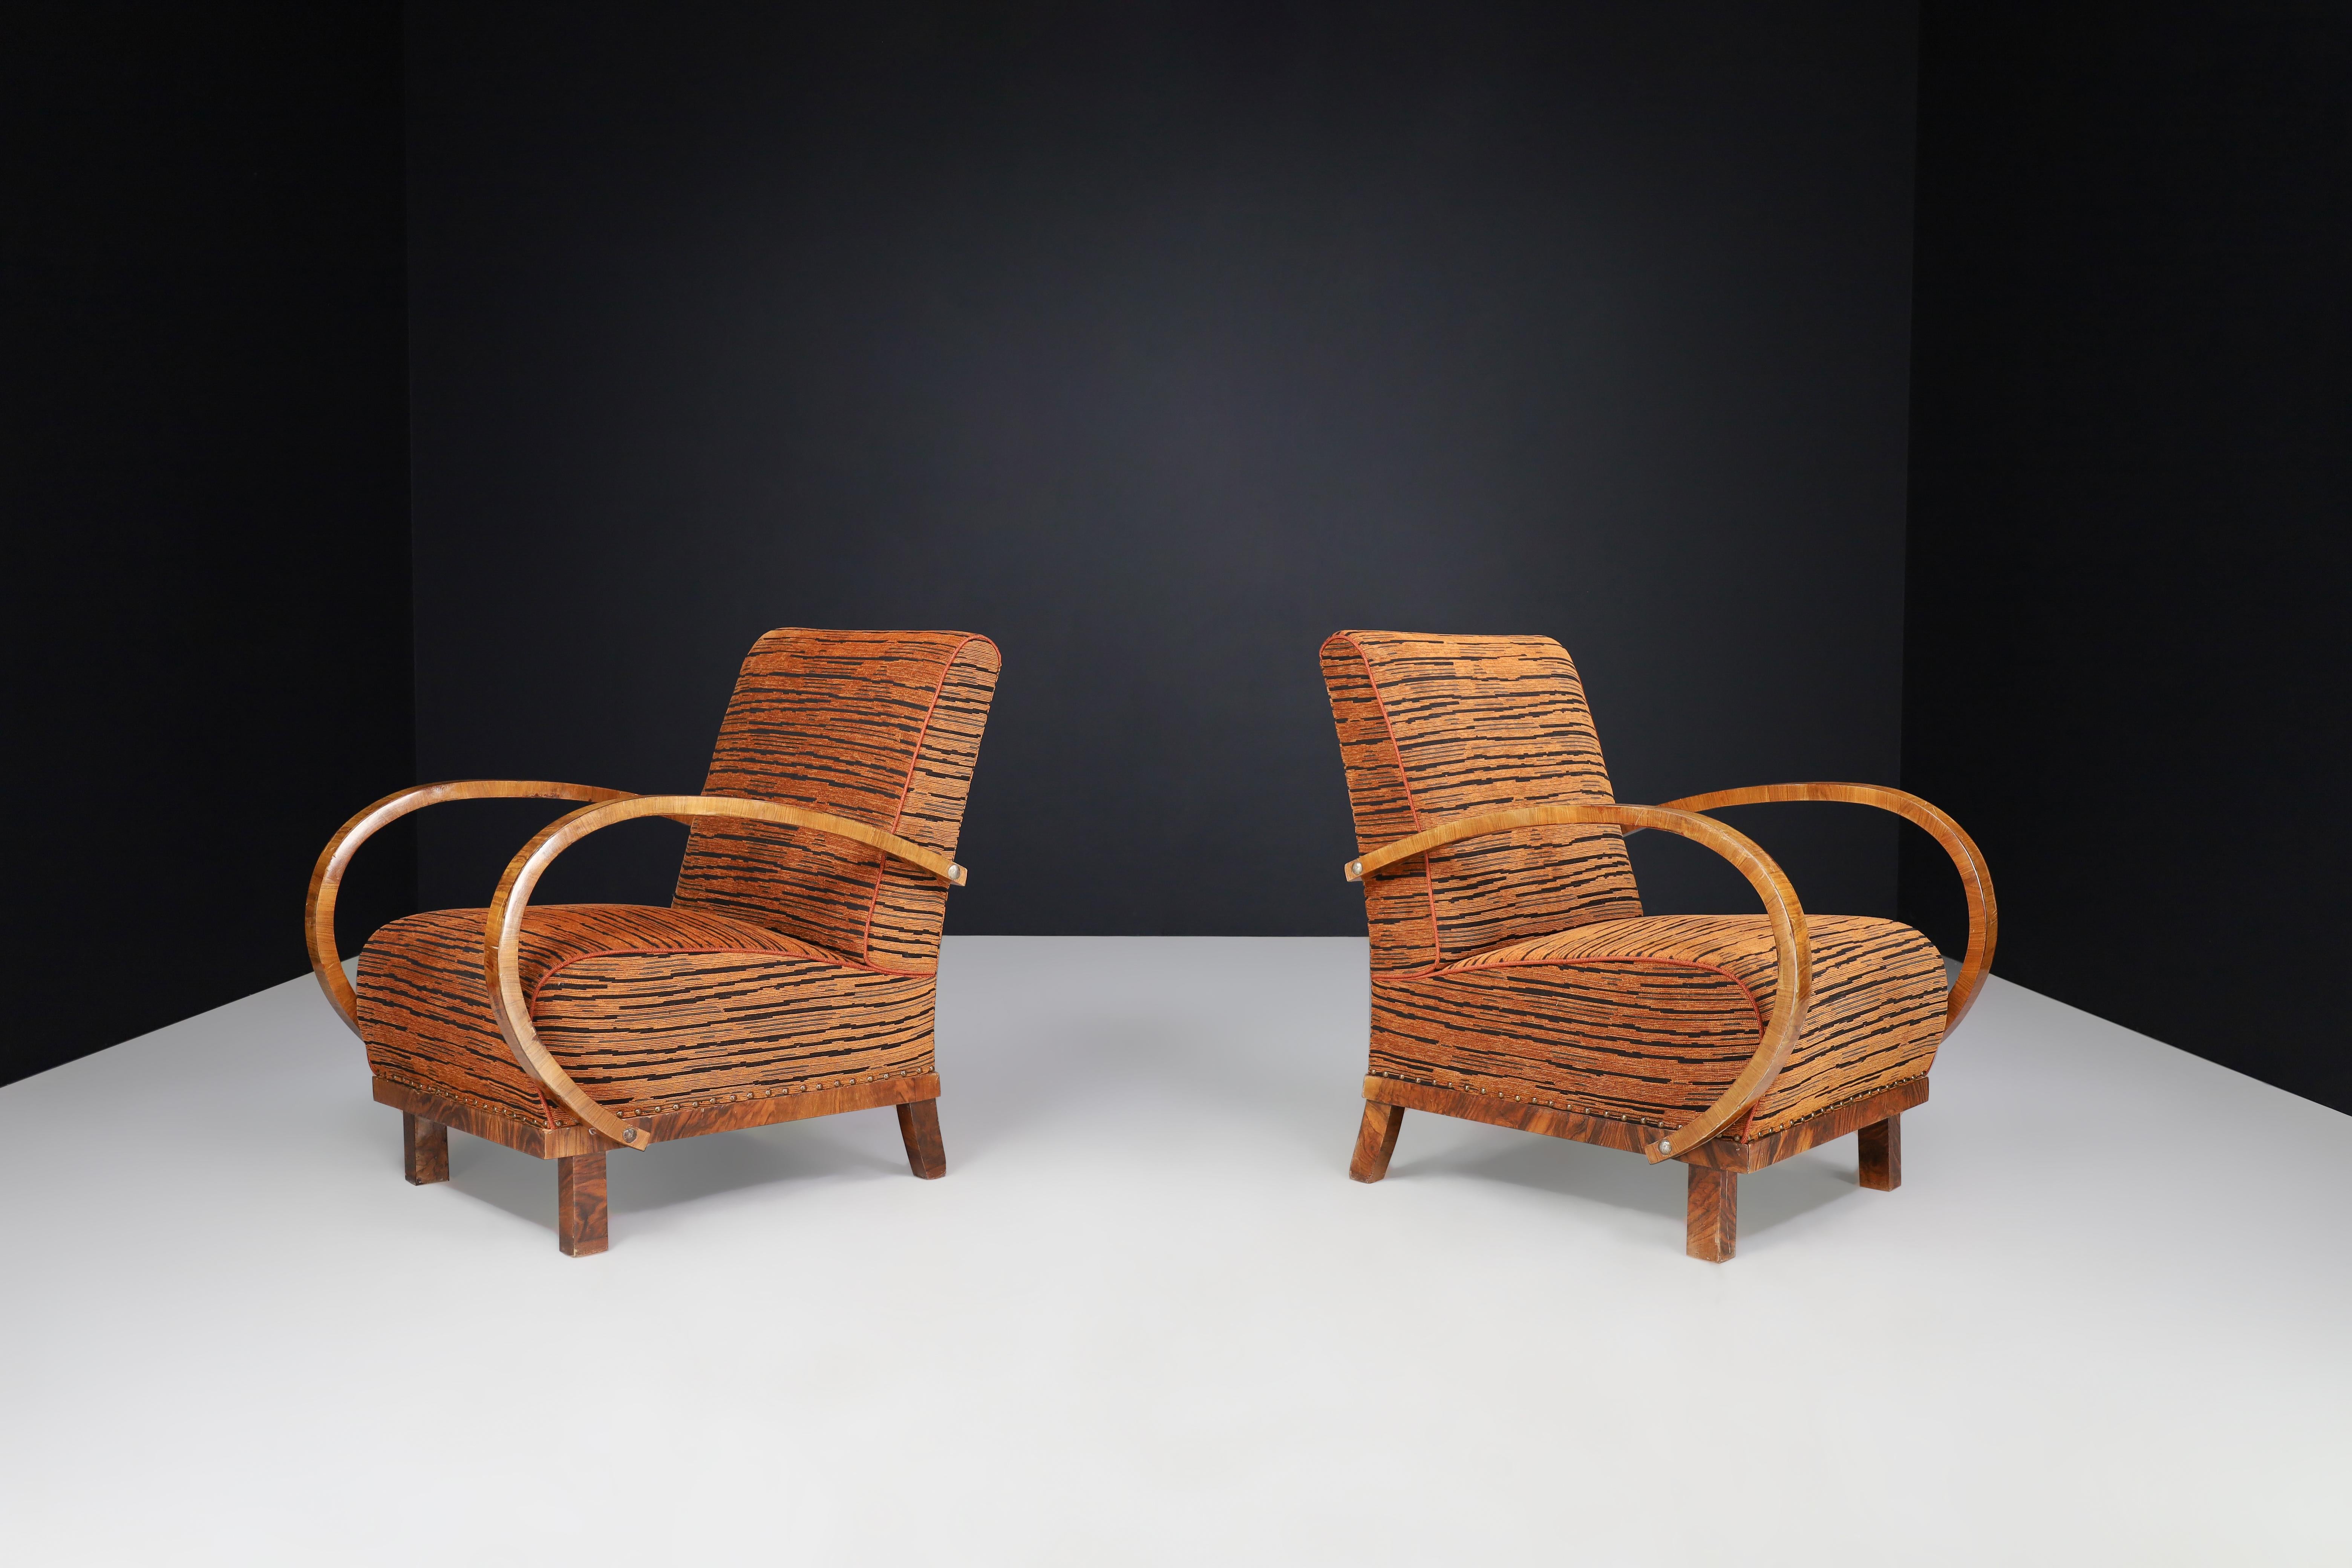 Art Deco armchairs in walnut in new upholstery, Austria 1930s

These are two Art Deco armchairs or lounge chairs made from walnut and upholstered with new fabric. They were made in Austria in the 1930s. These low armchairs are a great addition to